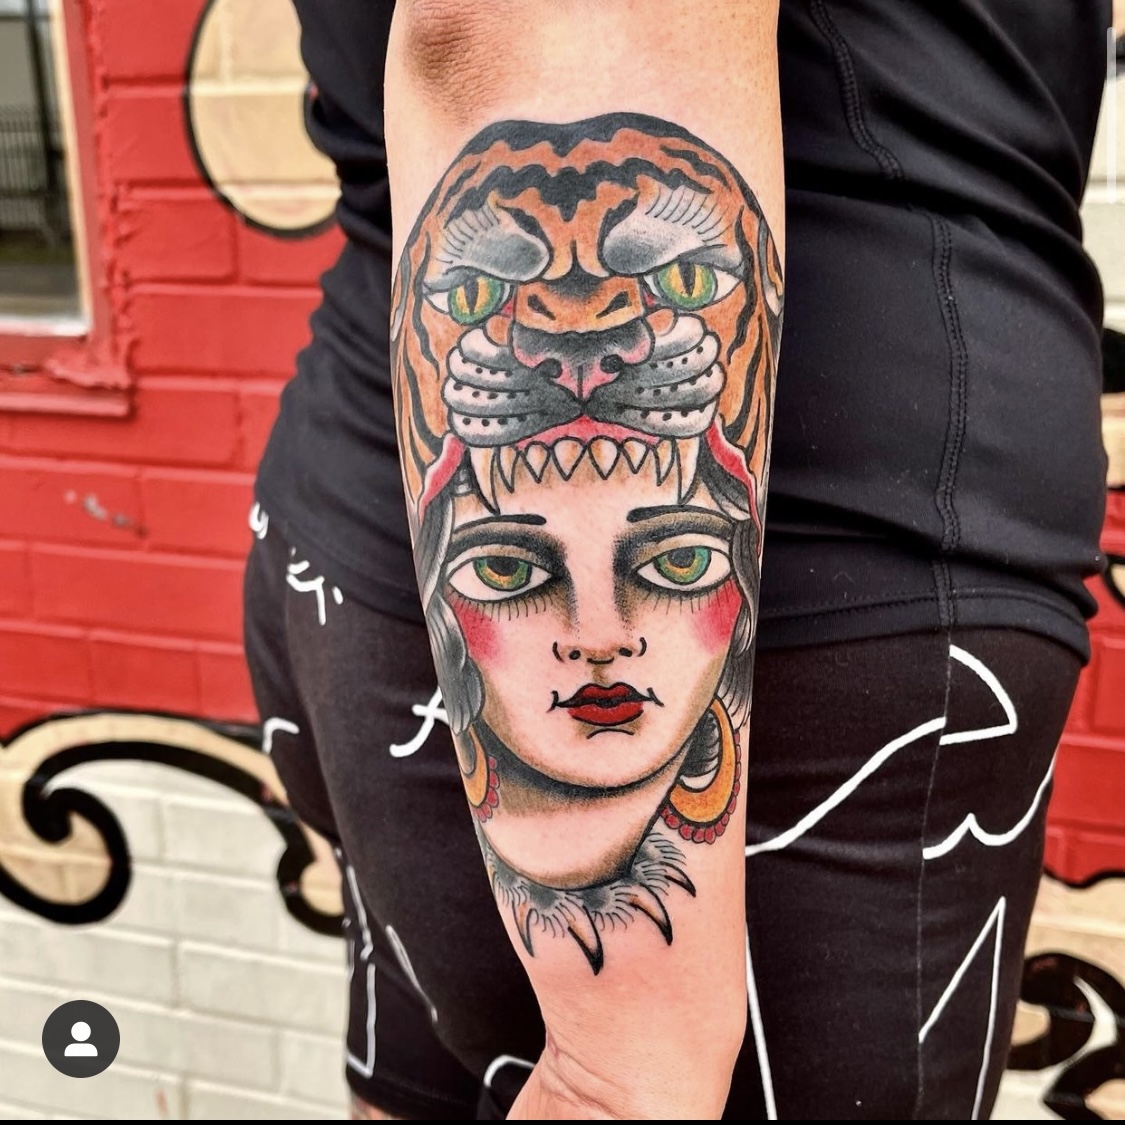 Tattoo of a woman and a tiger from tattoo shop in DFW